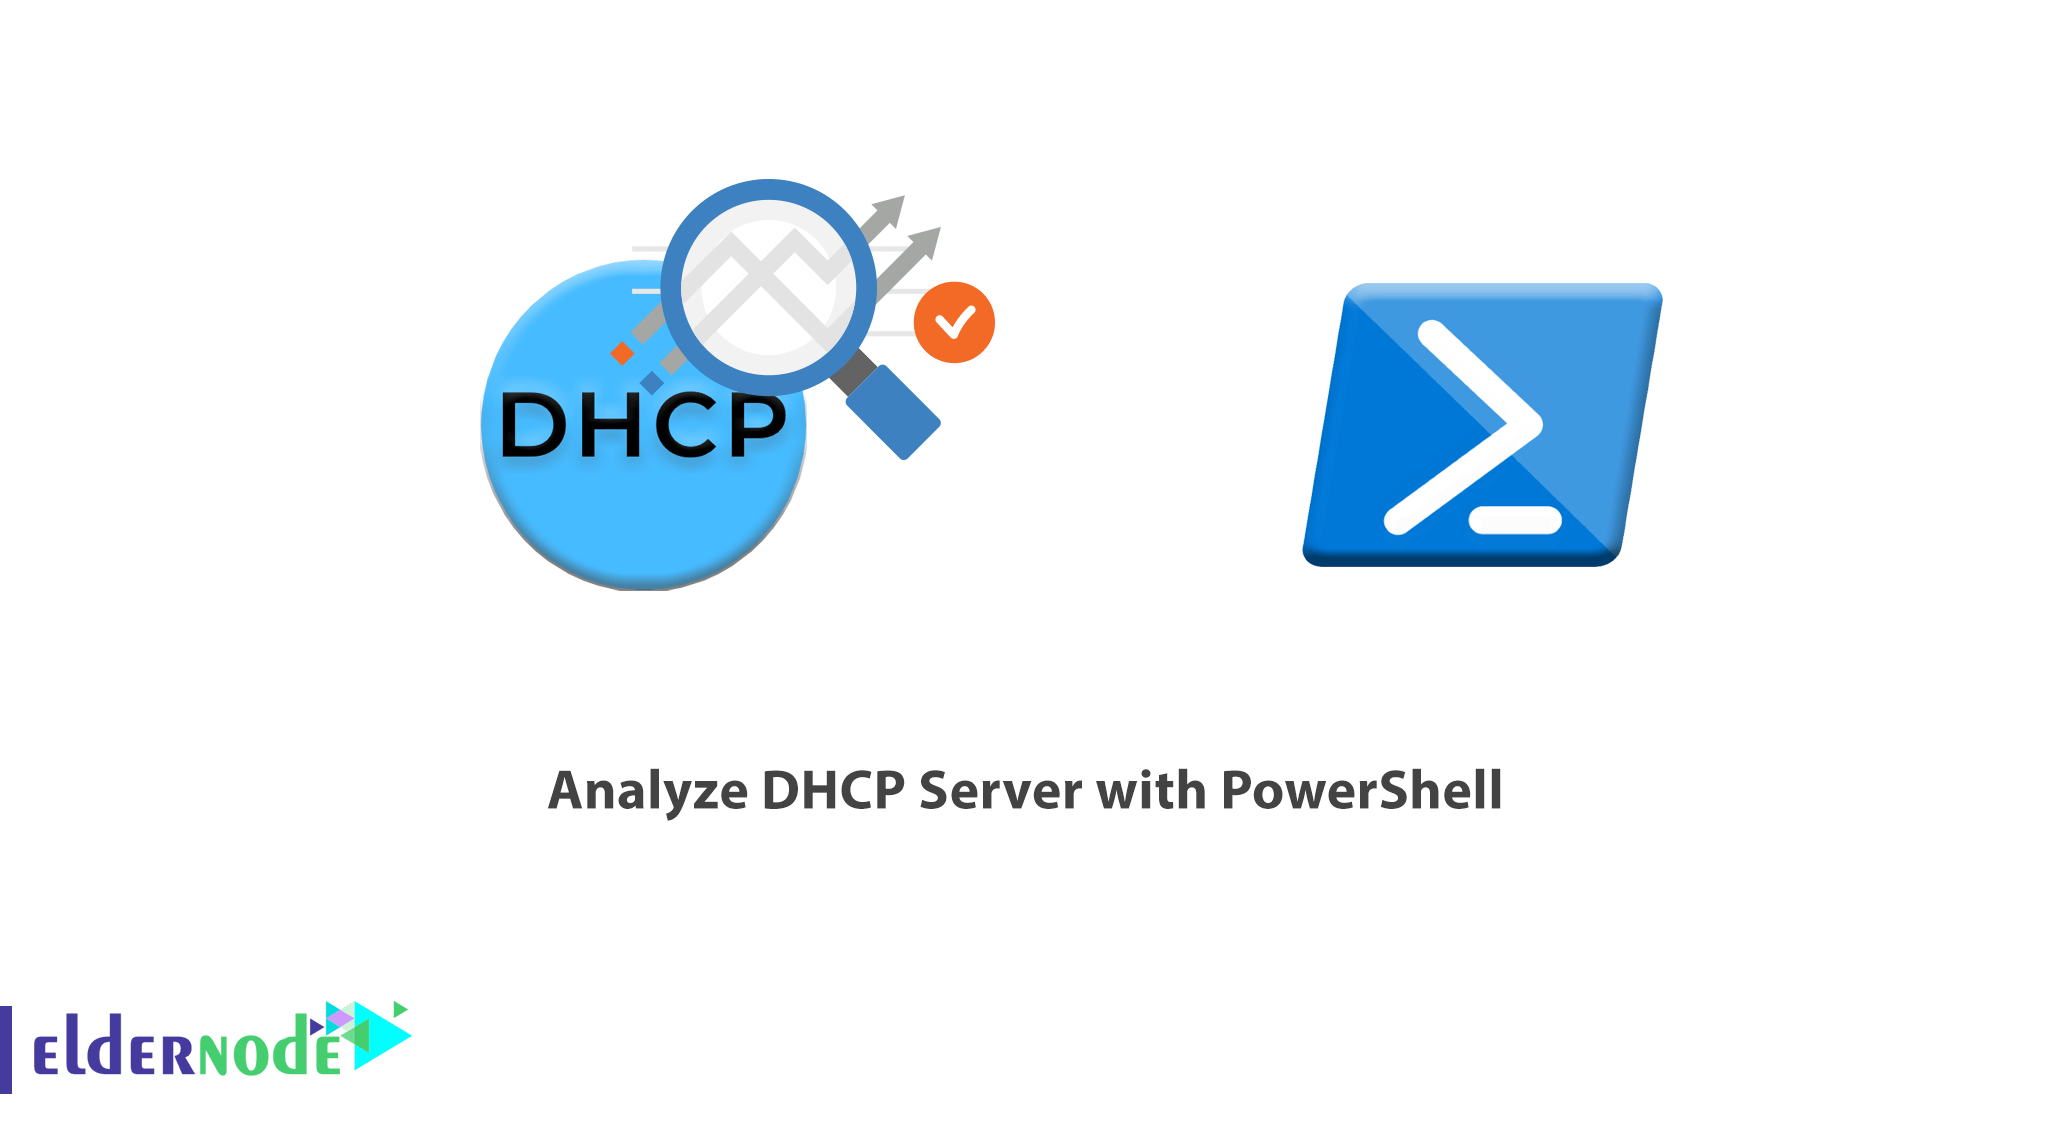 How to Analyze DHCP Server with PowerShell